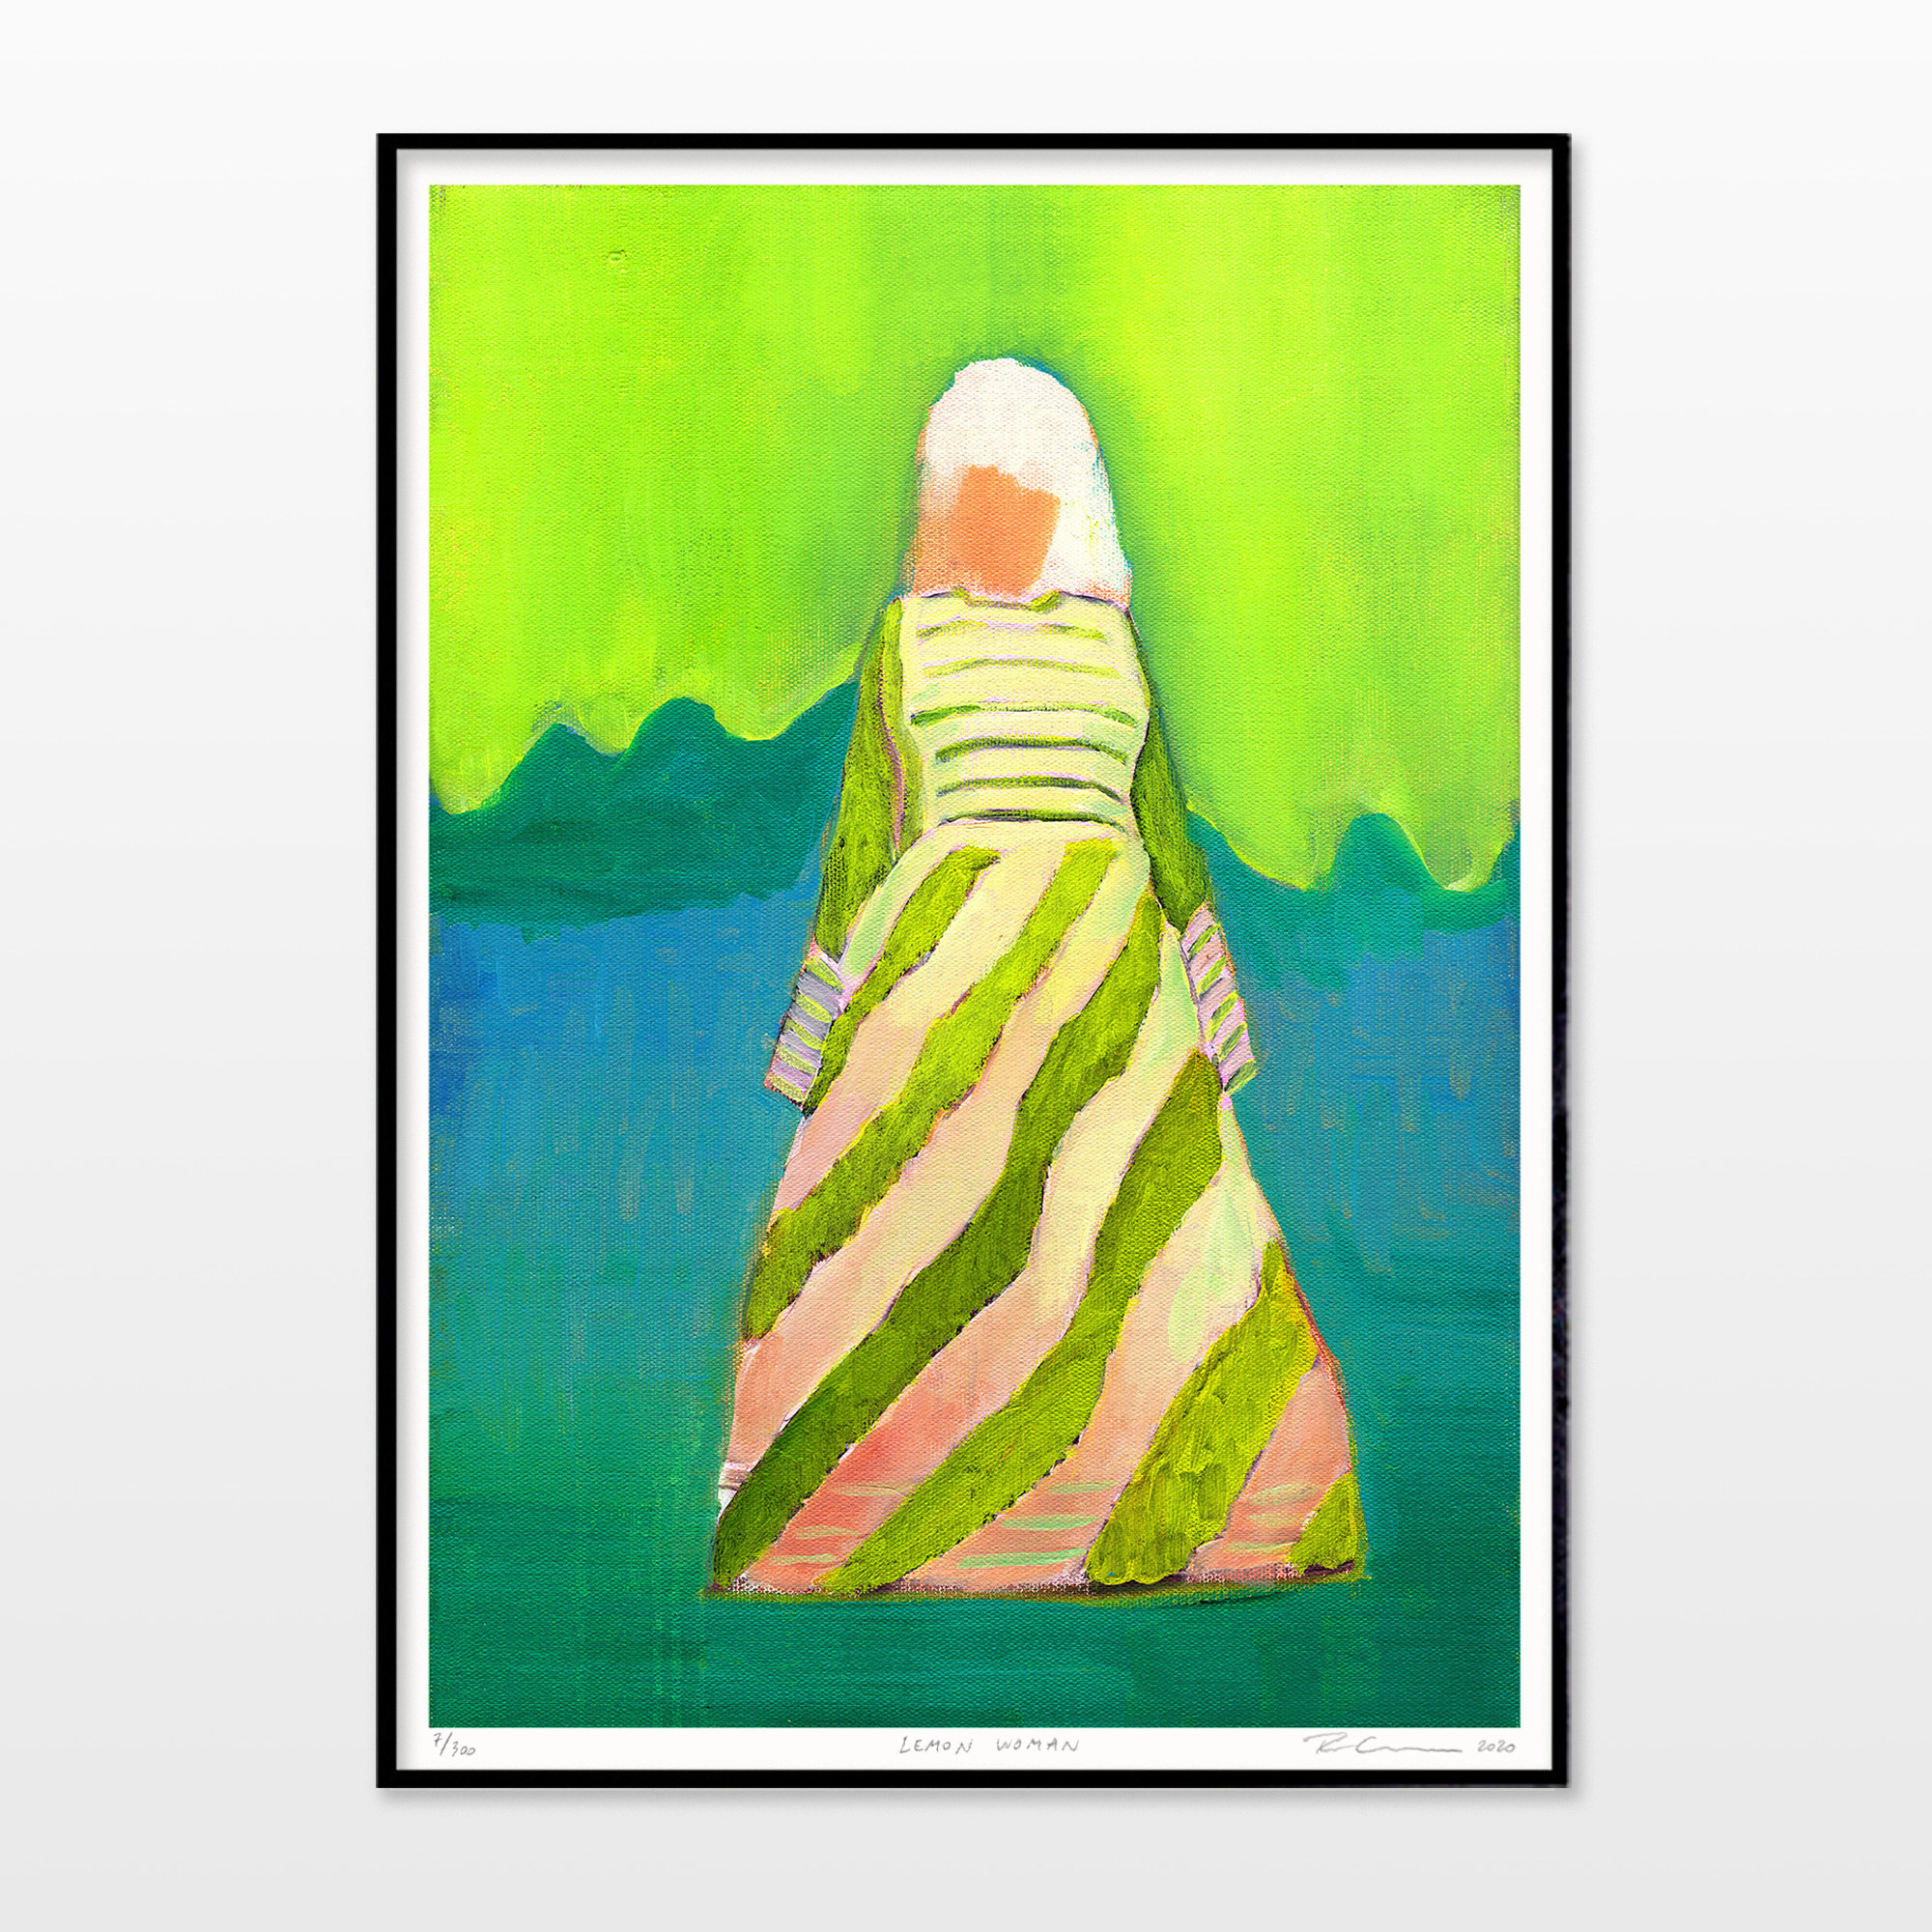 posters-prints, giclee-print, aesthetic, colorful, figurative, illustrative, portraiture, bodies, people, sky, blue, green, turquoise, ink, paper, beautiful, clothing, contemporary-art, copenhagen, danish, decorative, design, female, interior, interior-design, modern, motorcycle, nordic, posters, prints, scandinavien, women, Buy original high quality art. Paintings, drawings, limited edition prints & posters by talented artists.